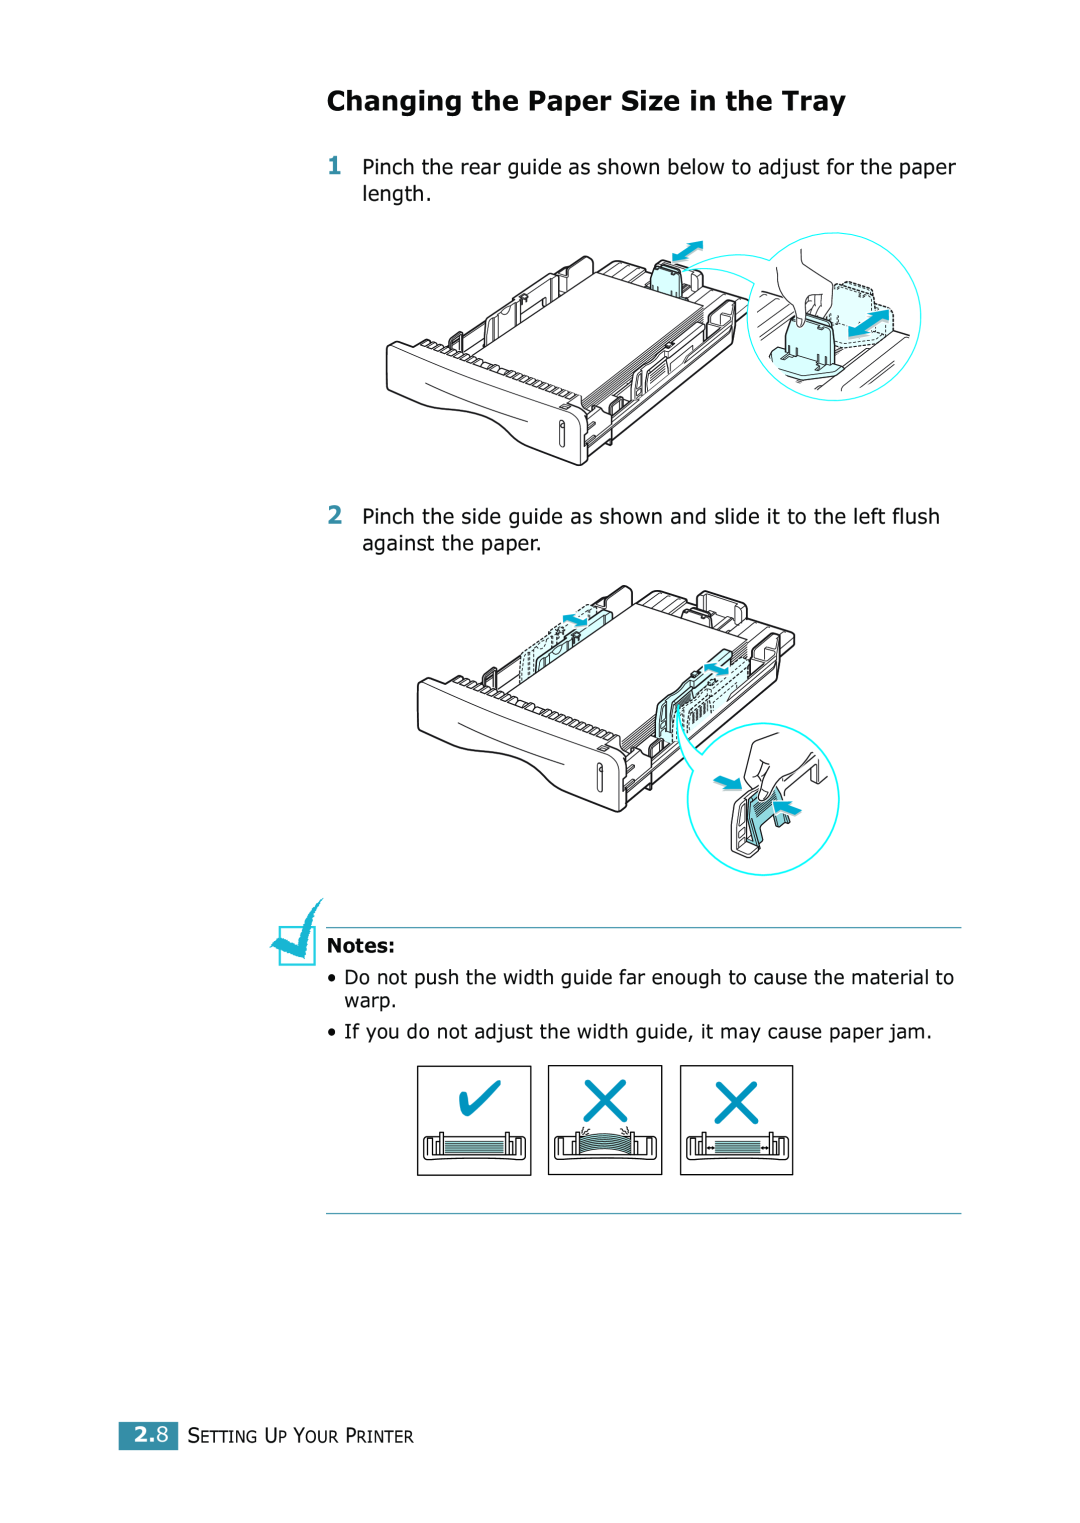 Samsung ML-1520 Changing the Paper Size in the Tray, Pinch the rear guide as shown below to adjust for the paper length 